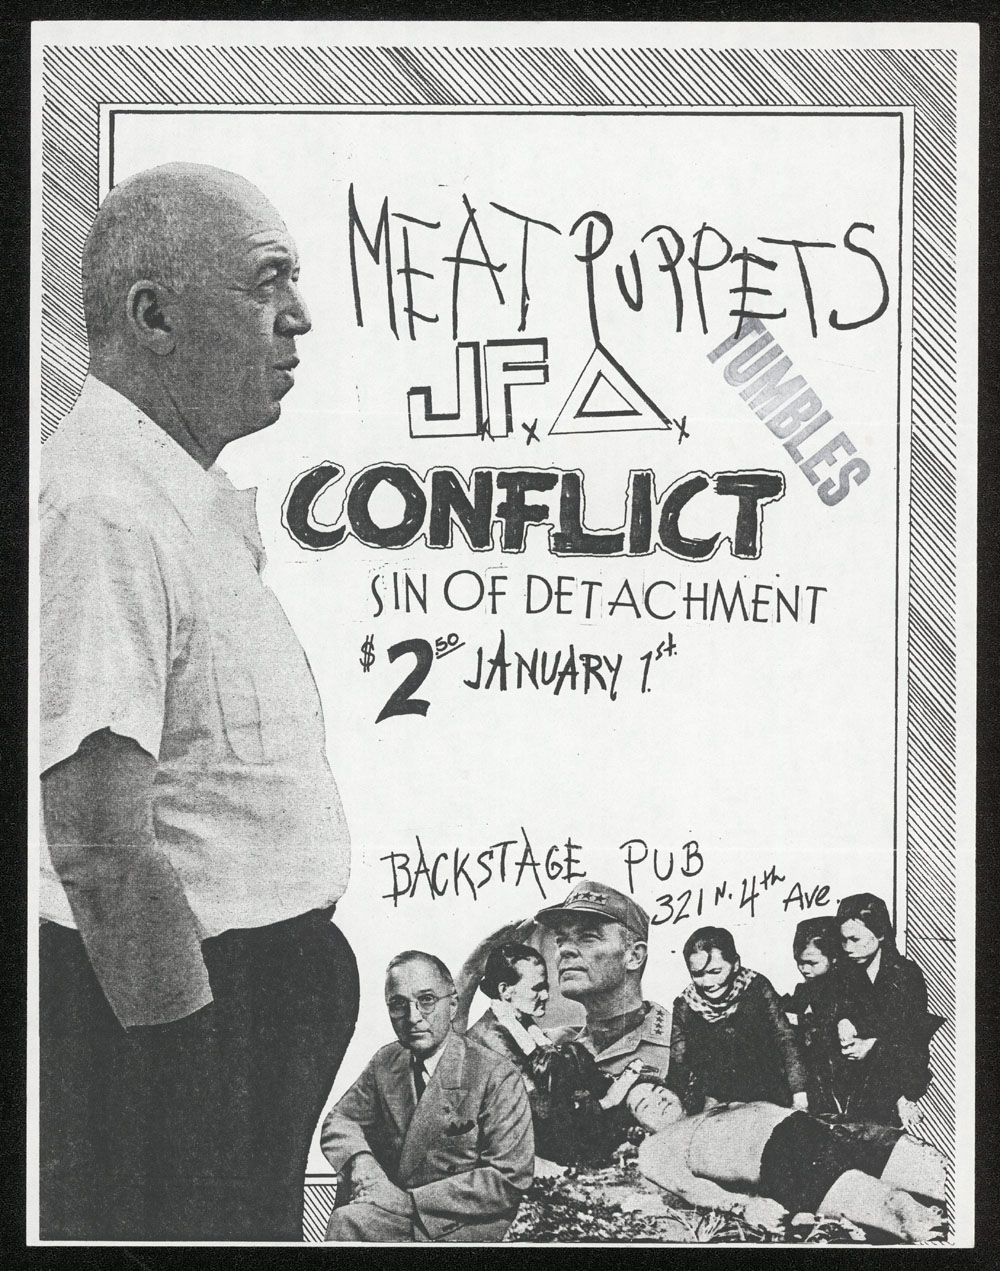 MEAT PUPPETS w/ JFA, Conflict, Sin of Detachment at Backstage Pub